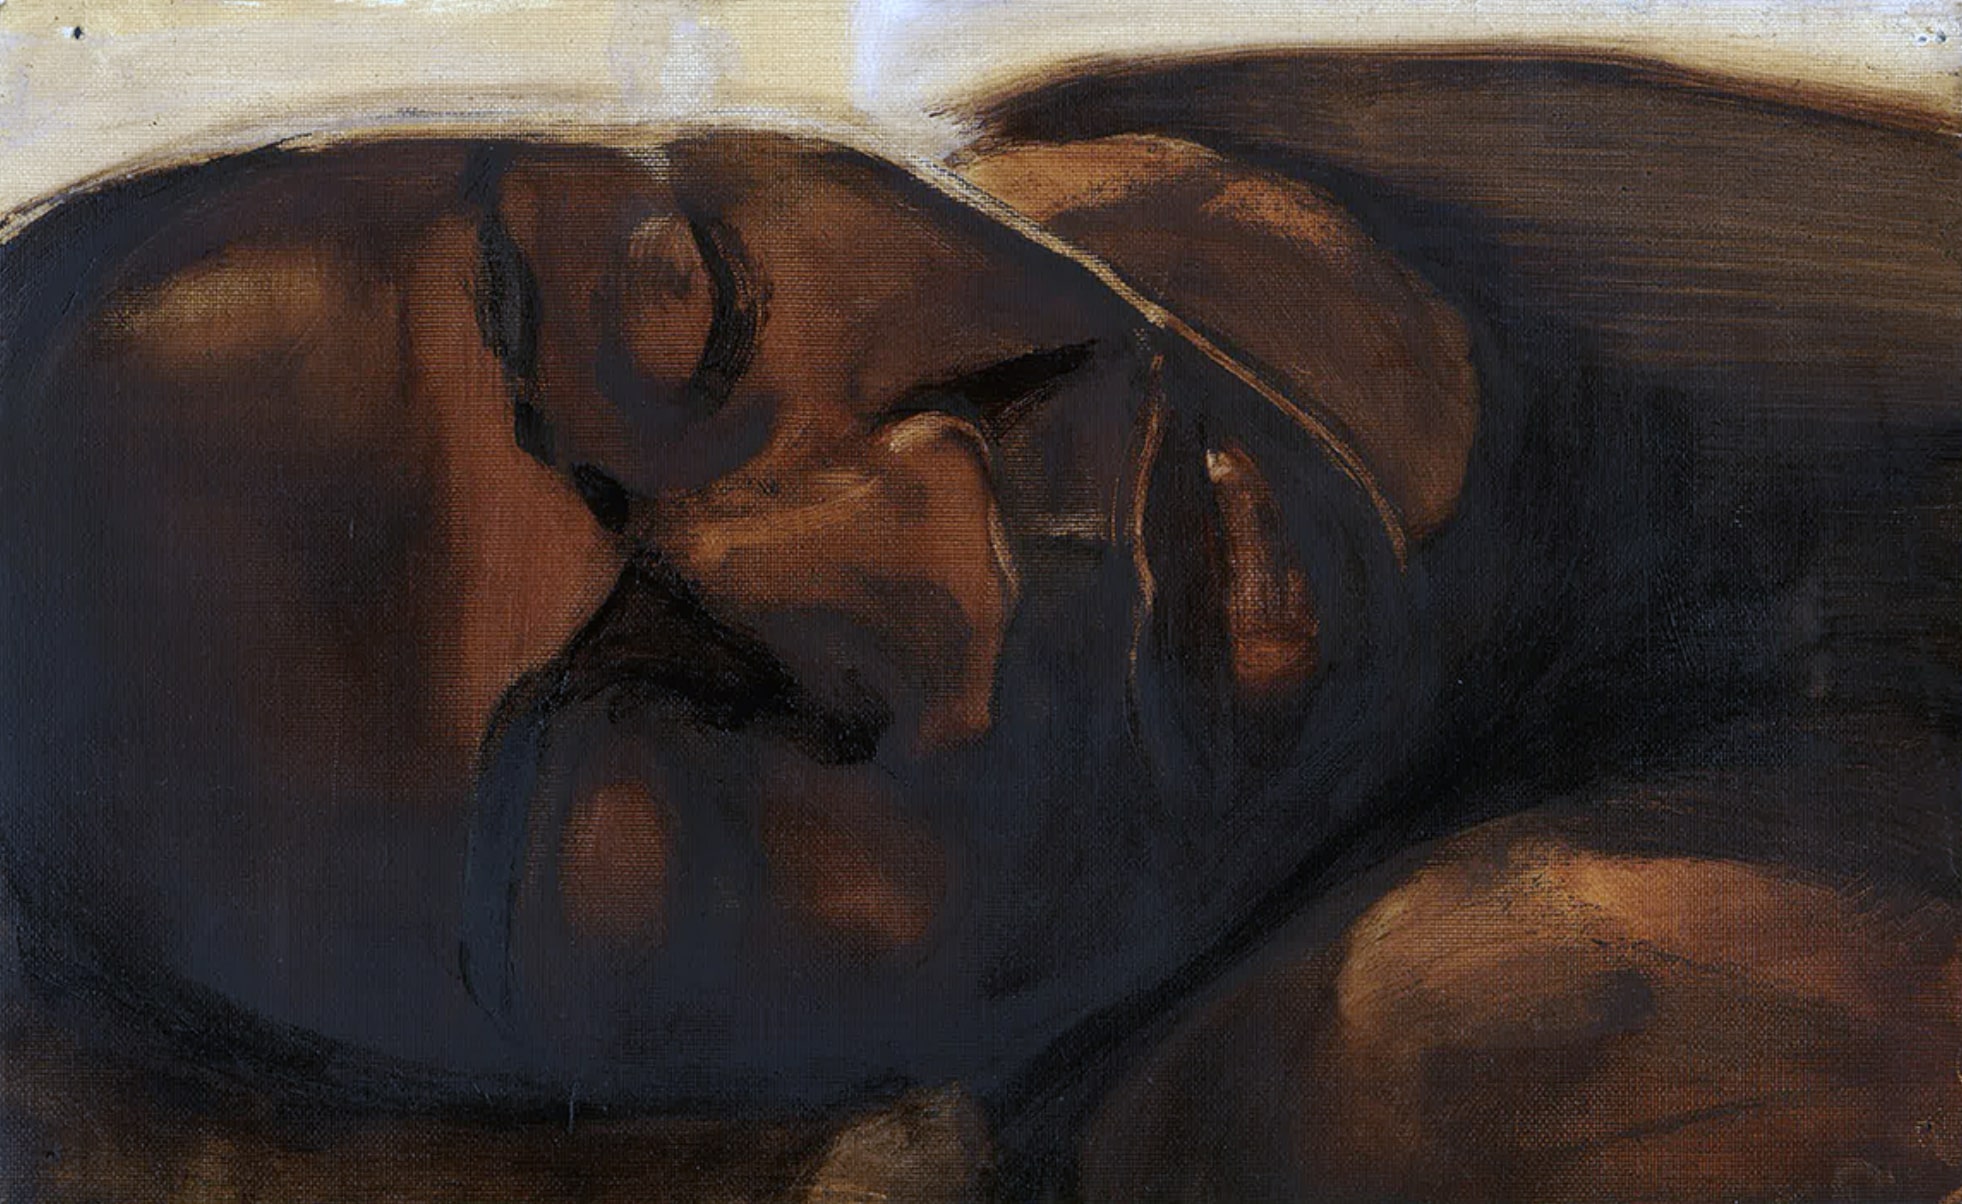 The Wick - Sikelela Owen, David, Oil on Canvas Paper, 51x36 cm